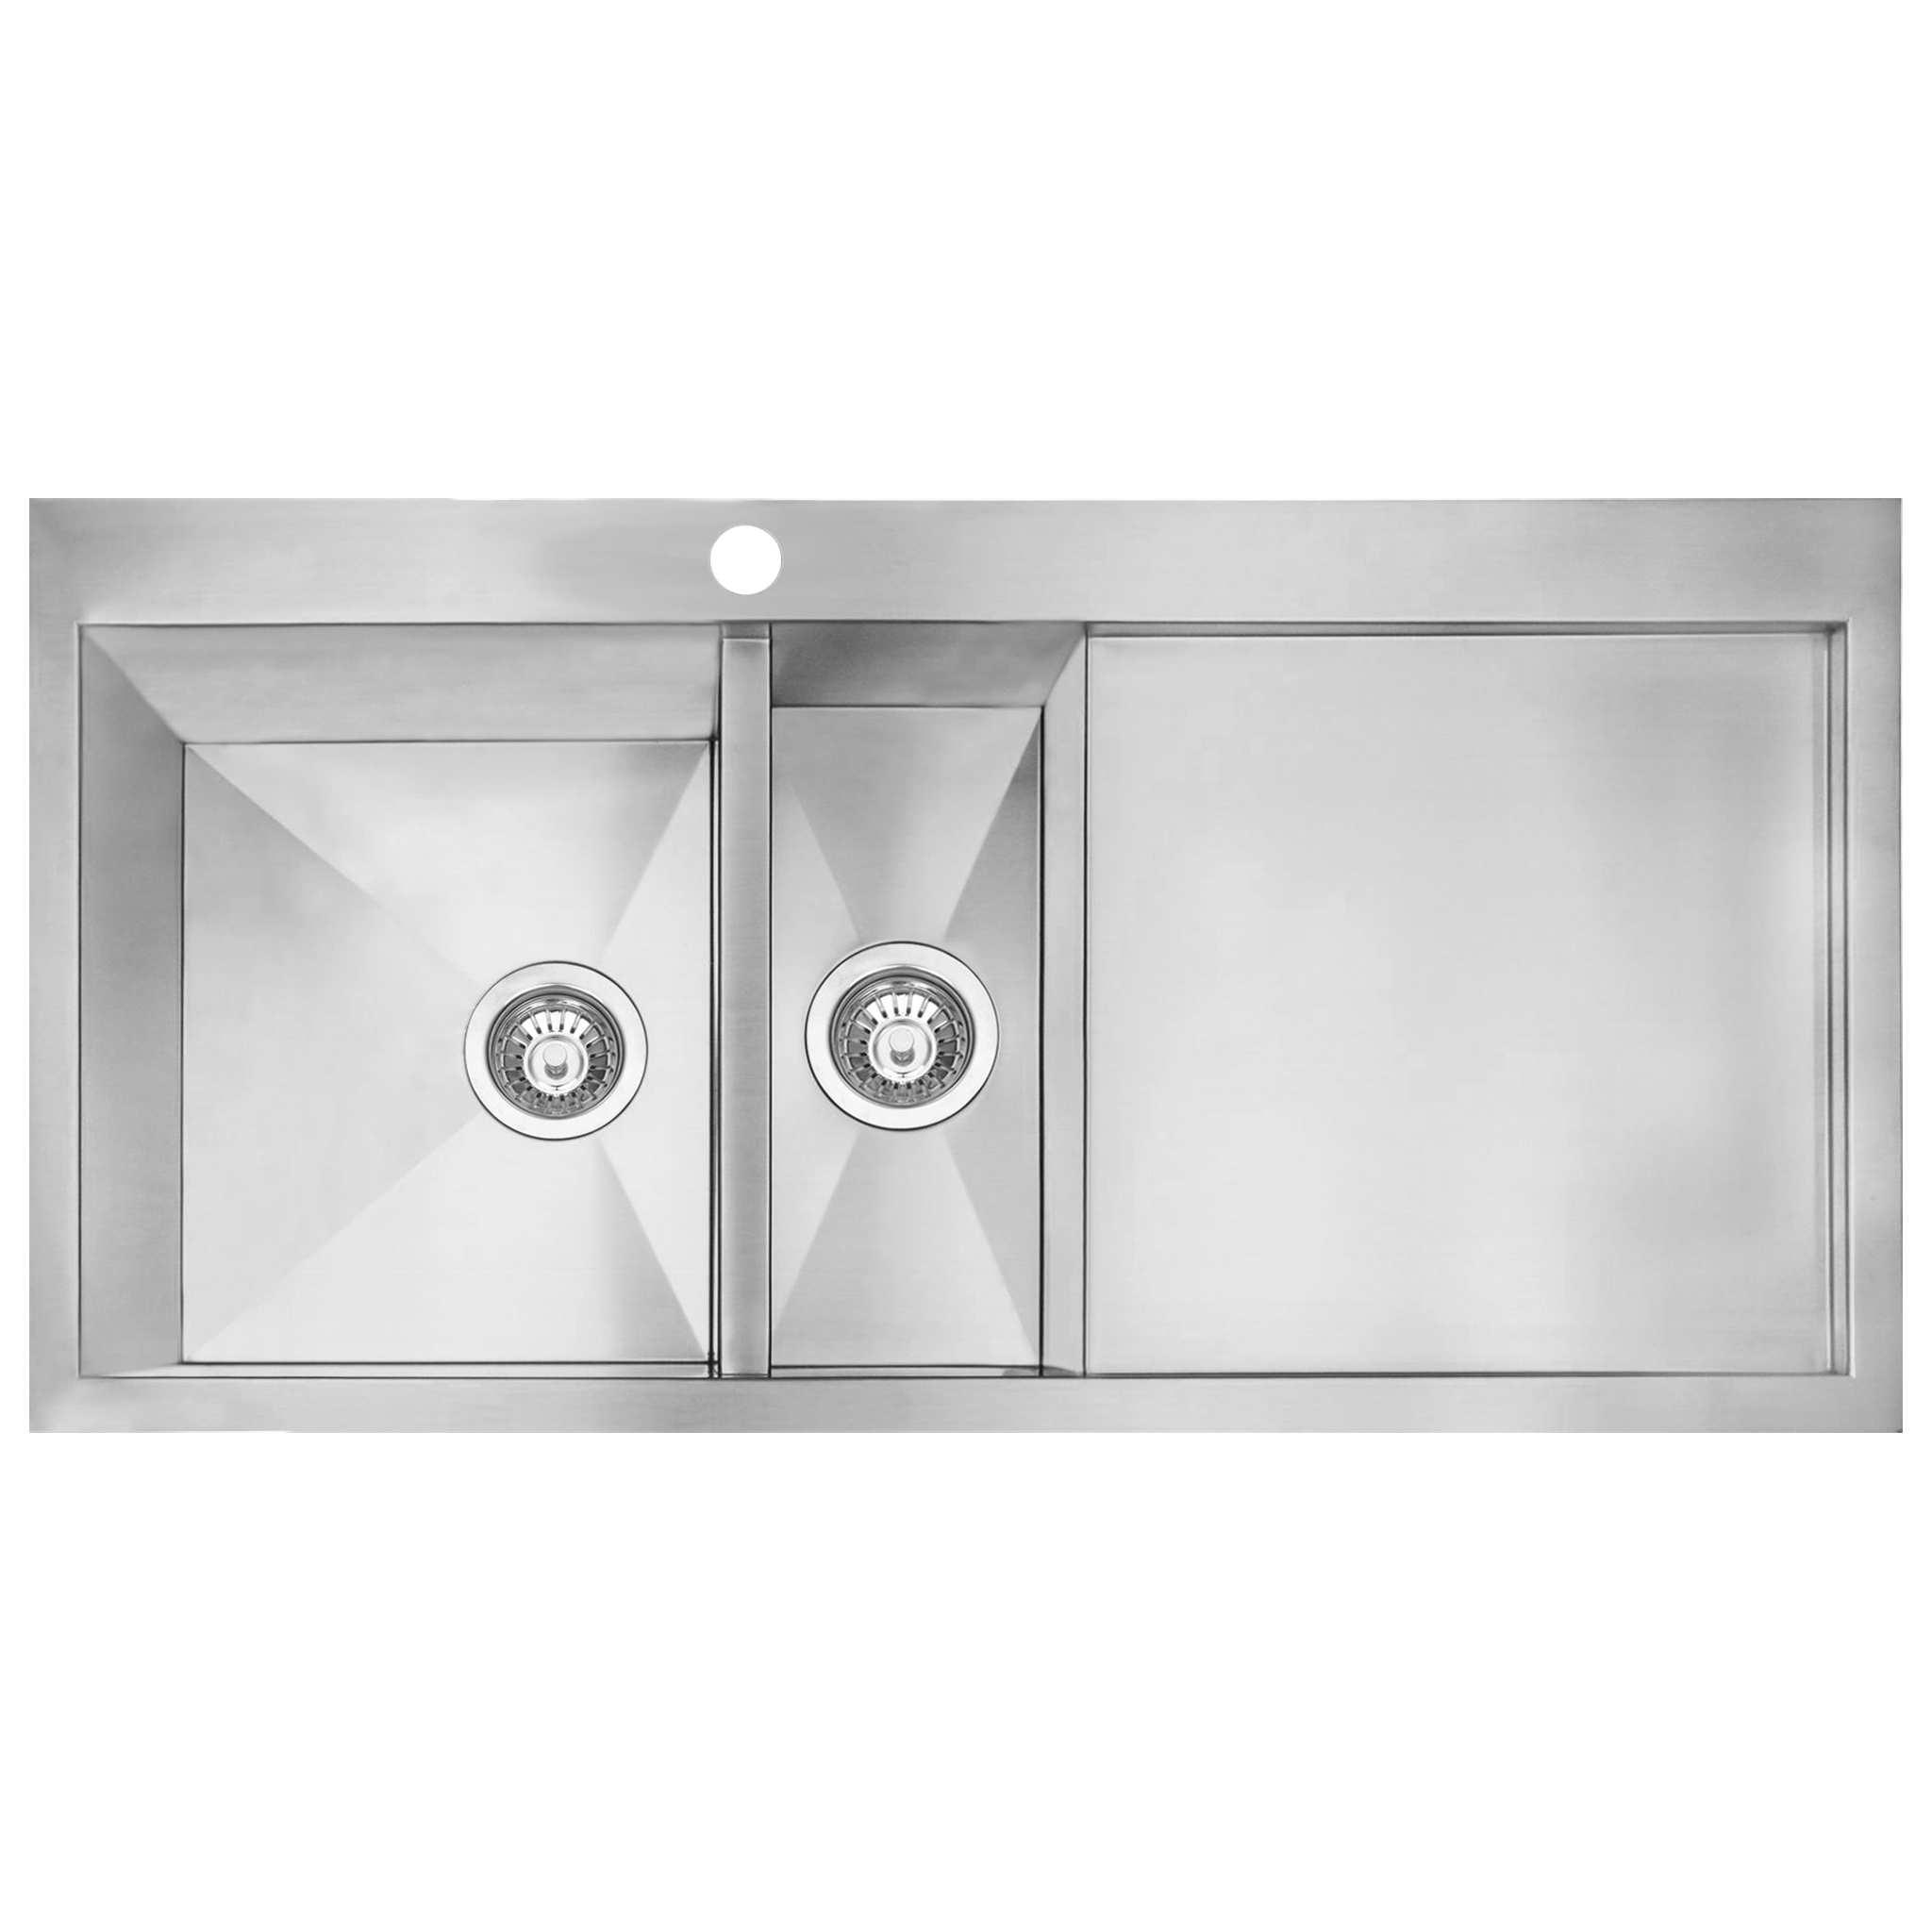 392010zd Bowl And Half Topmount Stainless Steel Sink With Drain Board